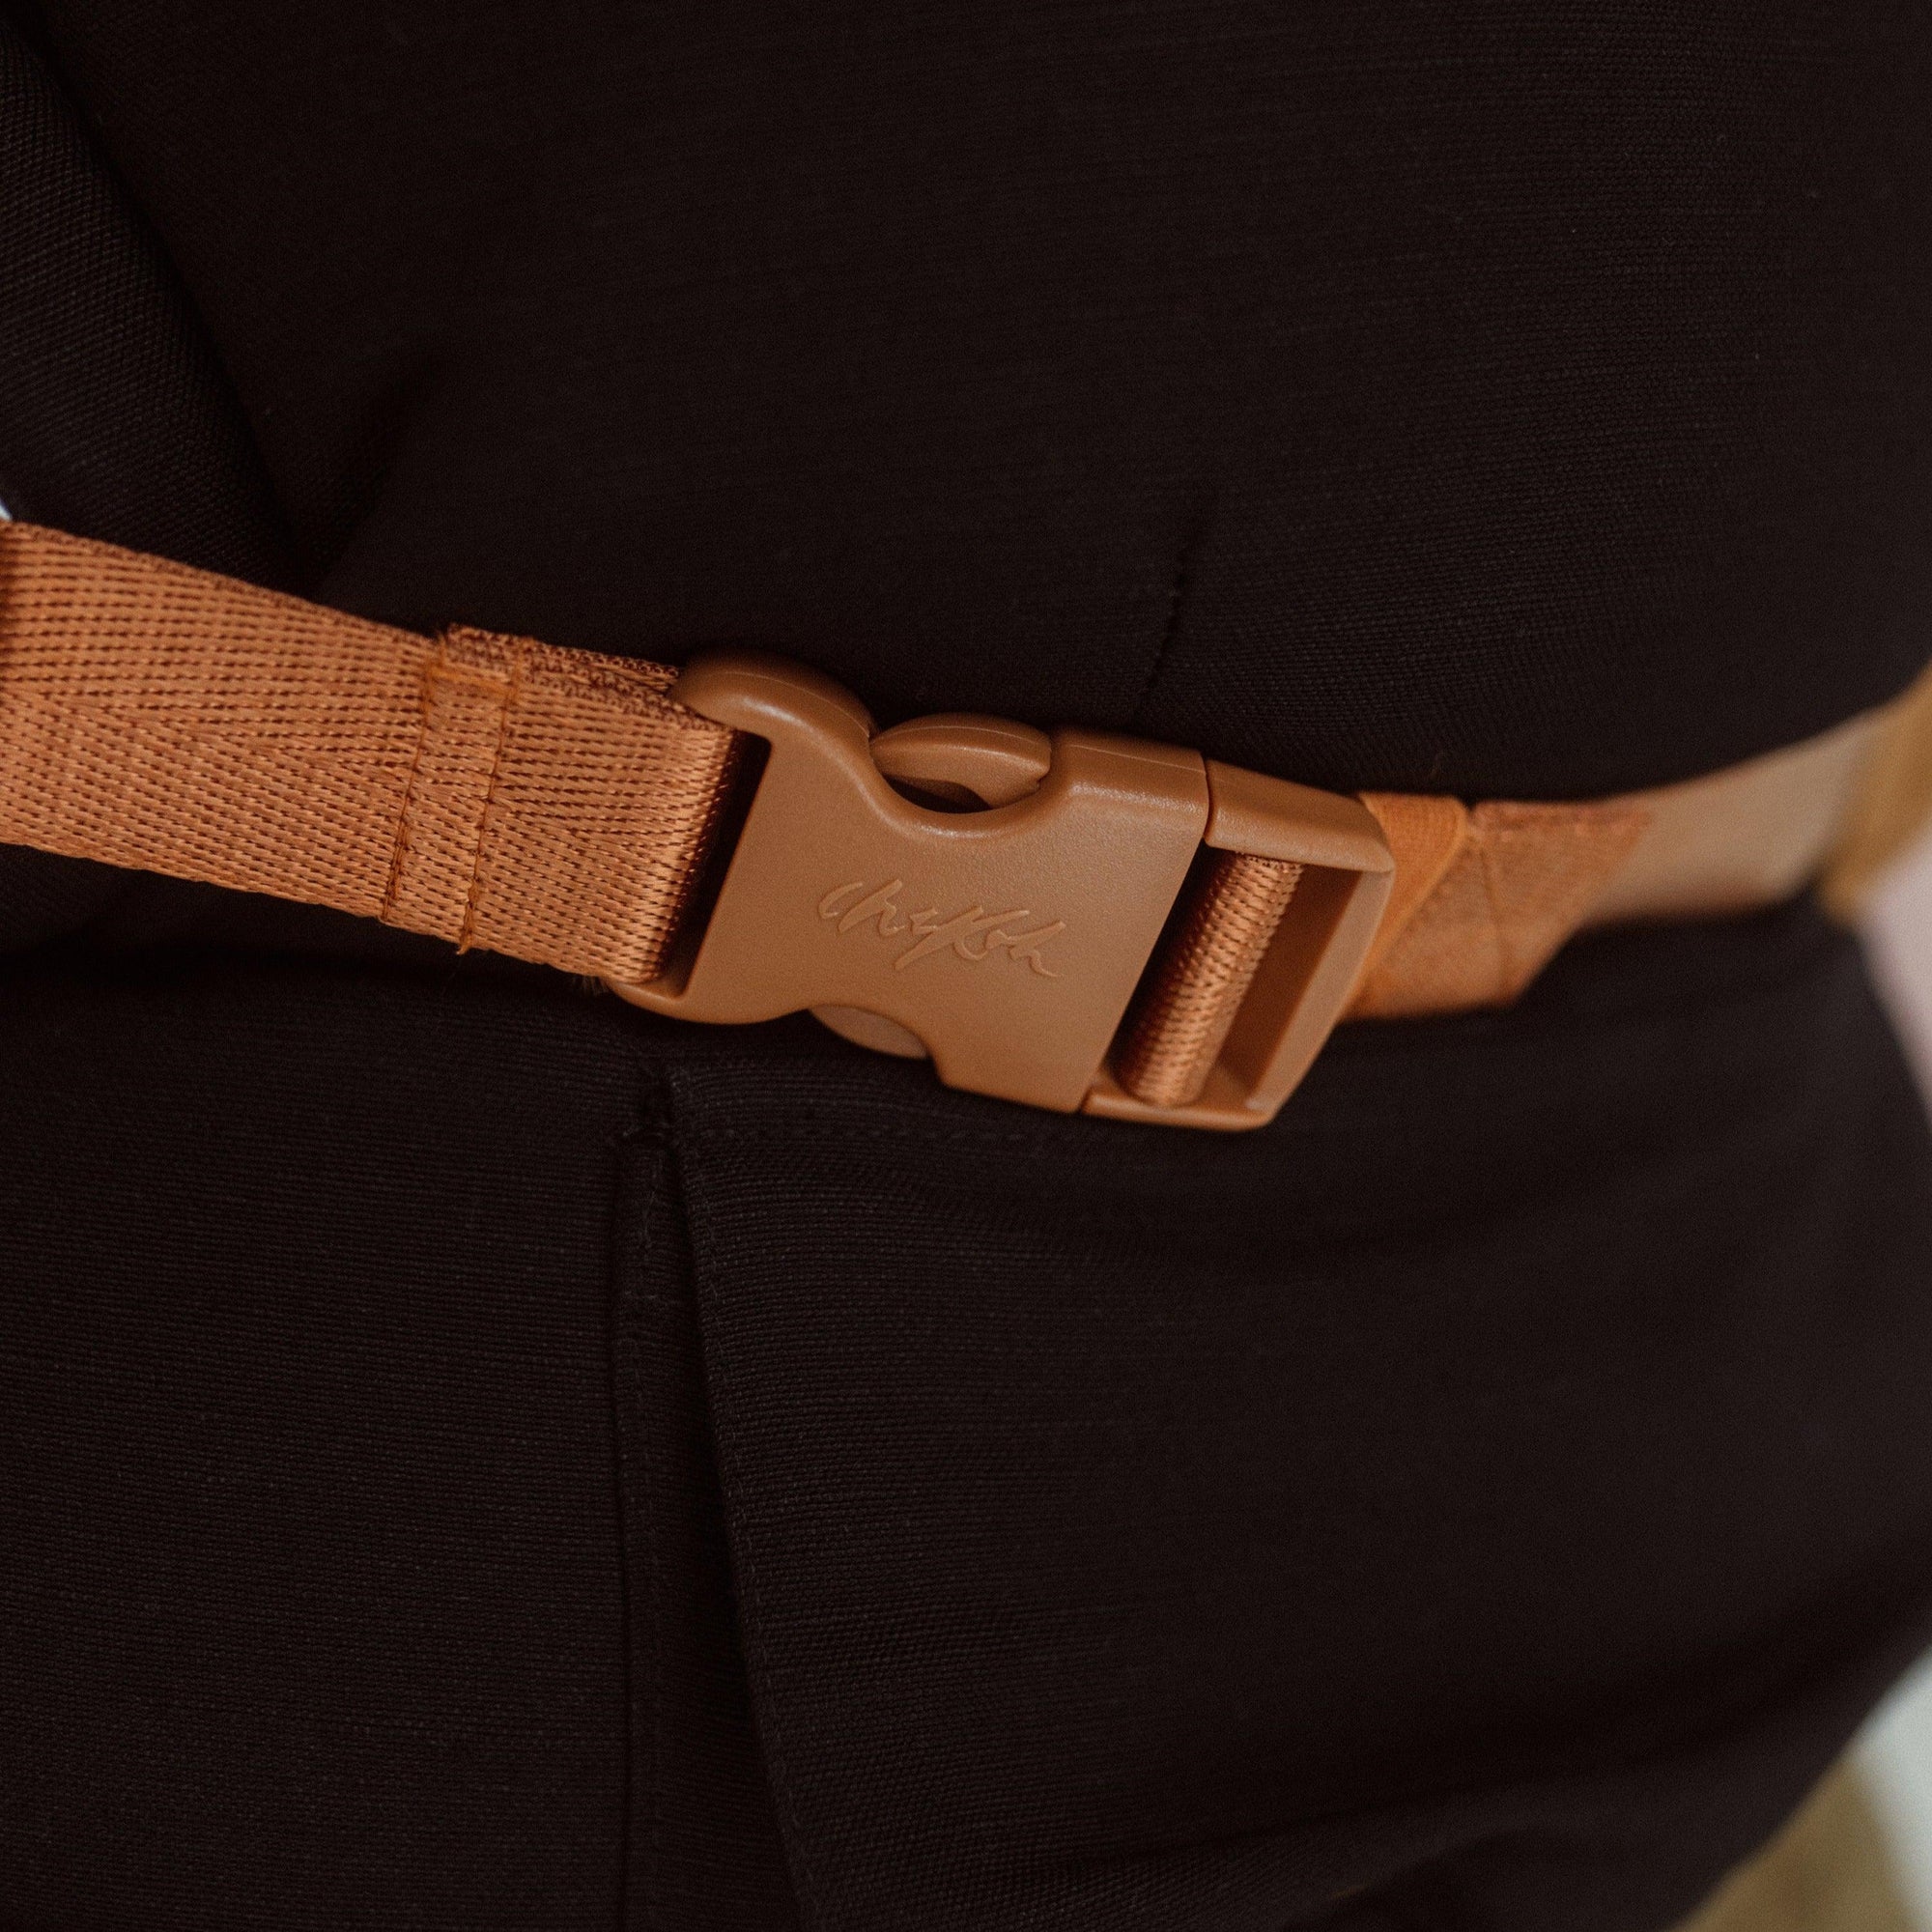 A close up of the Cinta Clip Carrier by Chekoh.